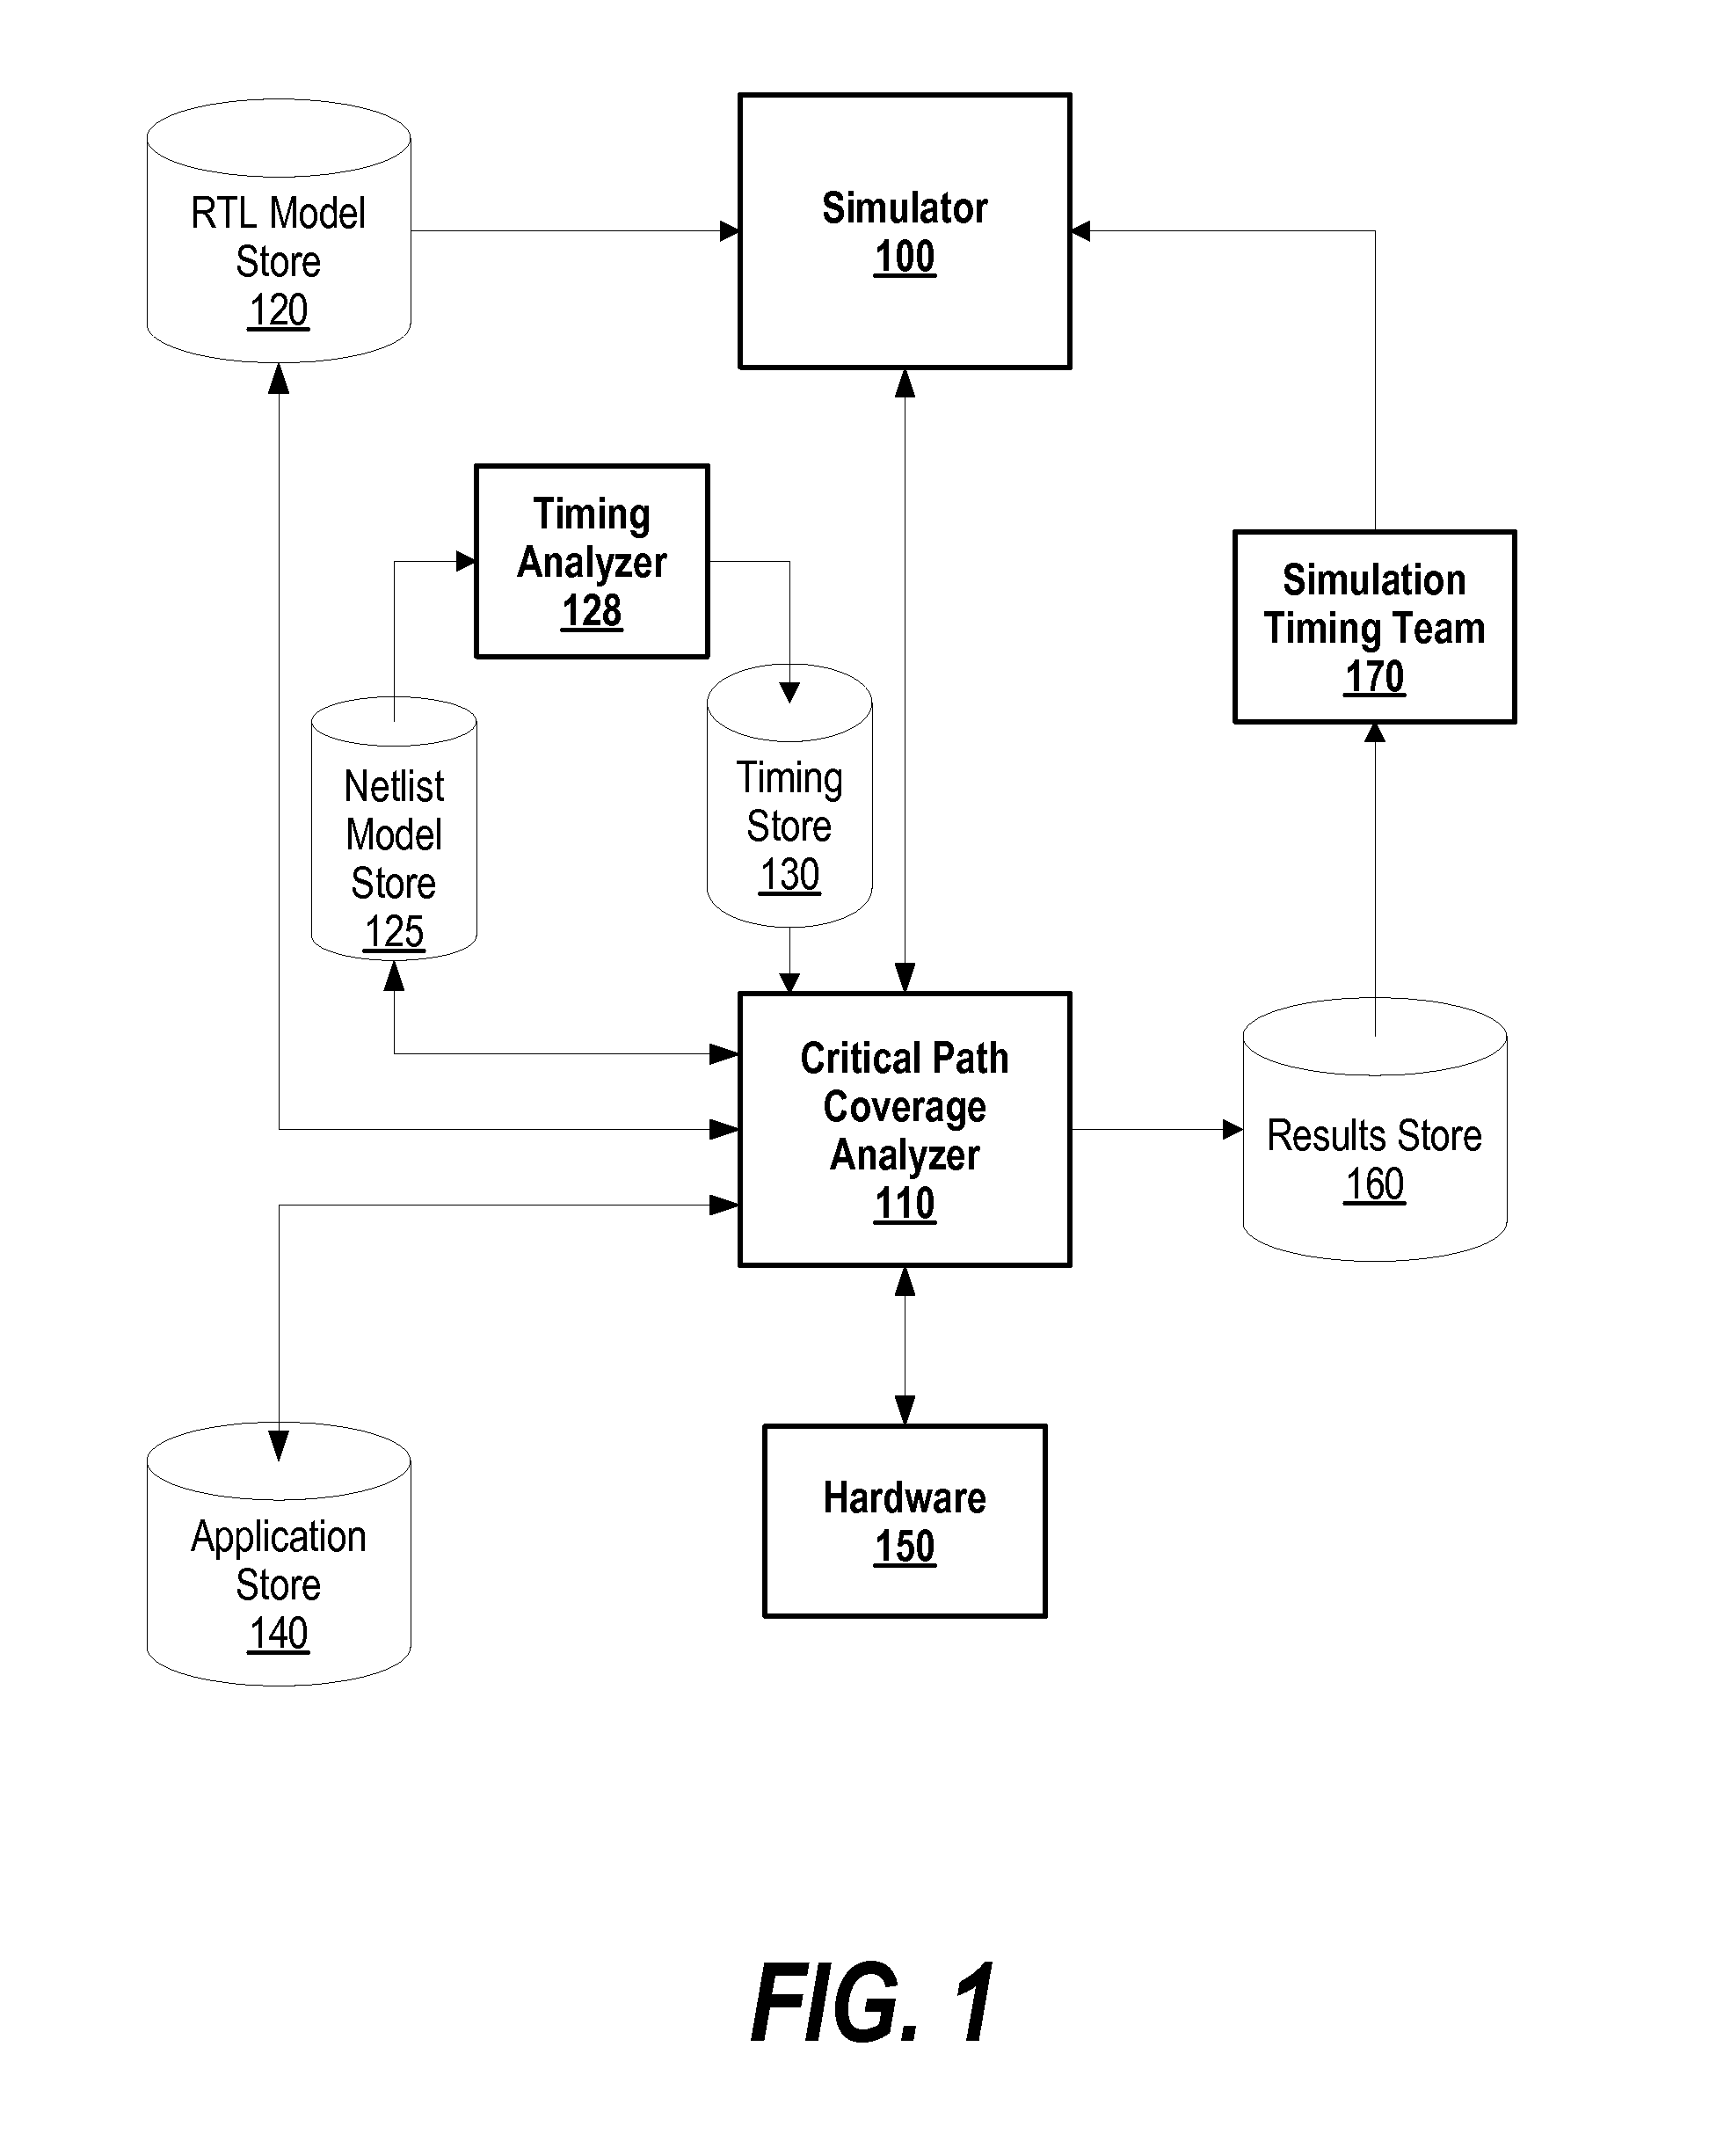 System and Method of Automating the Addition of RTL Based Critical Timing Path Counters to Verify Critical Path Coverage of Post-Silicon Software Validation Tools